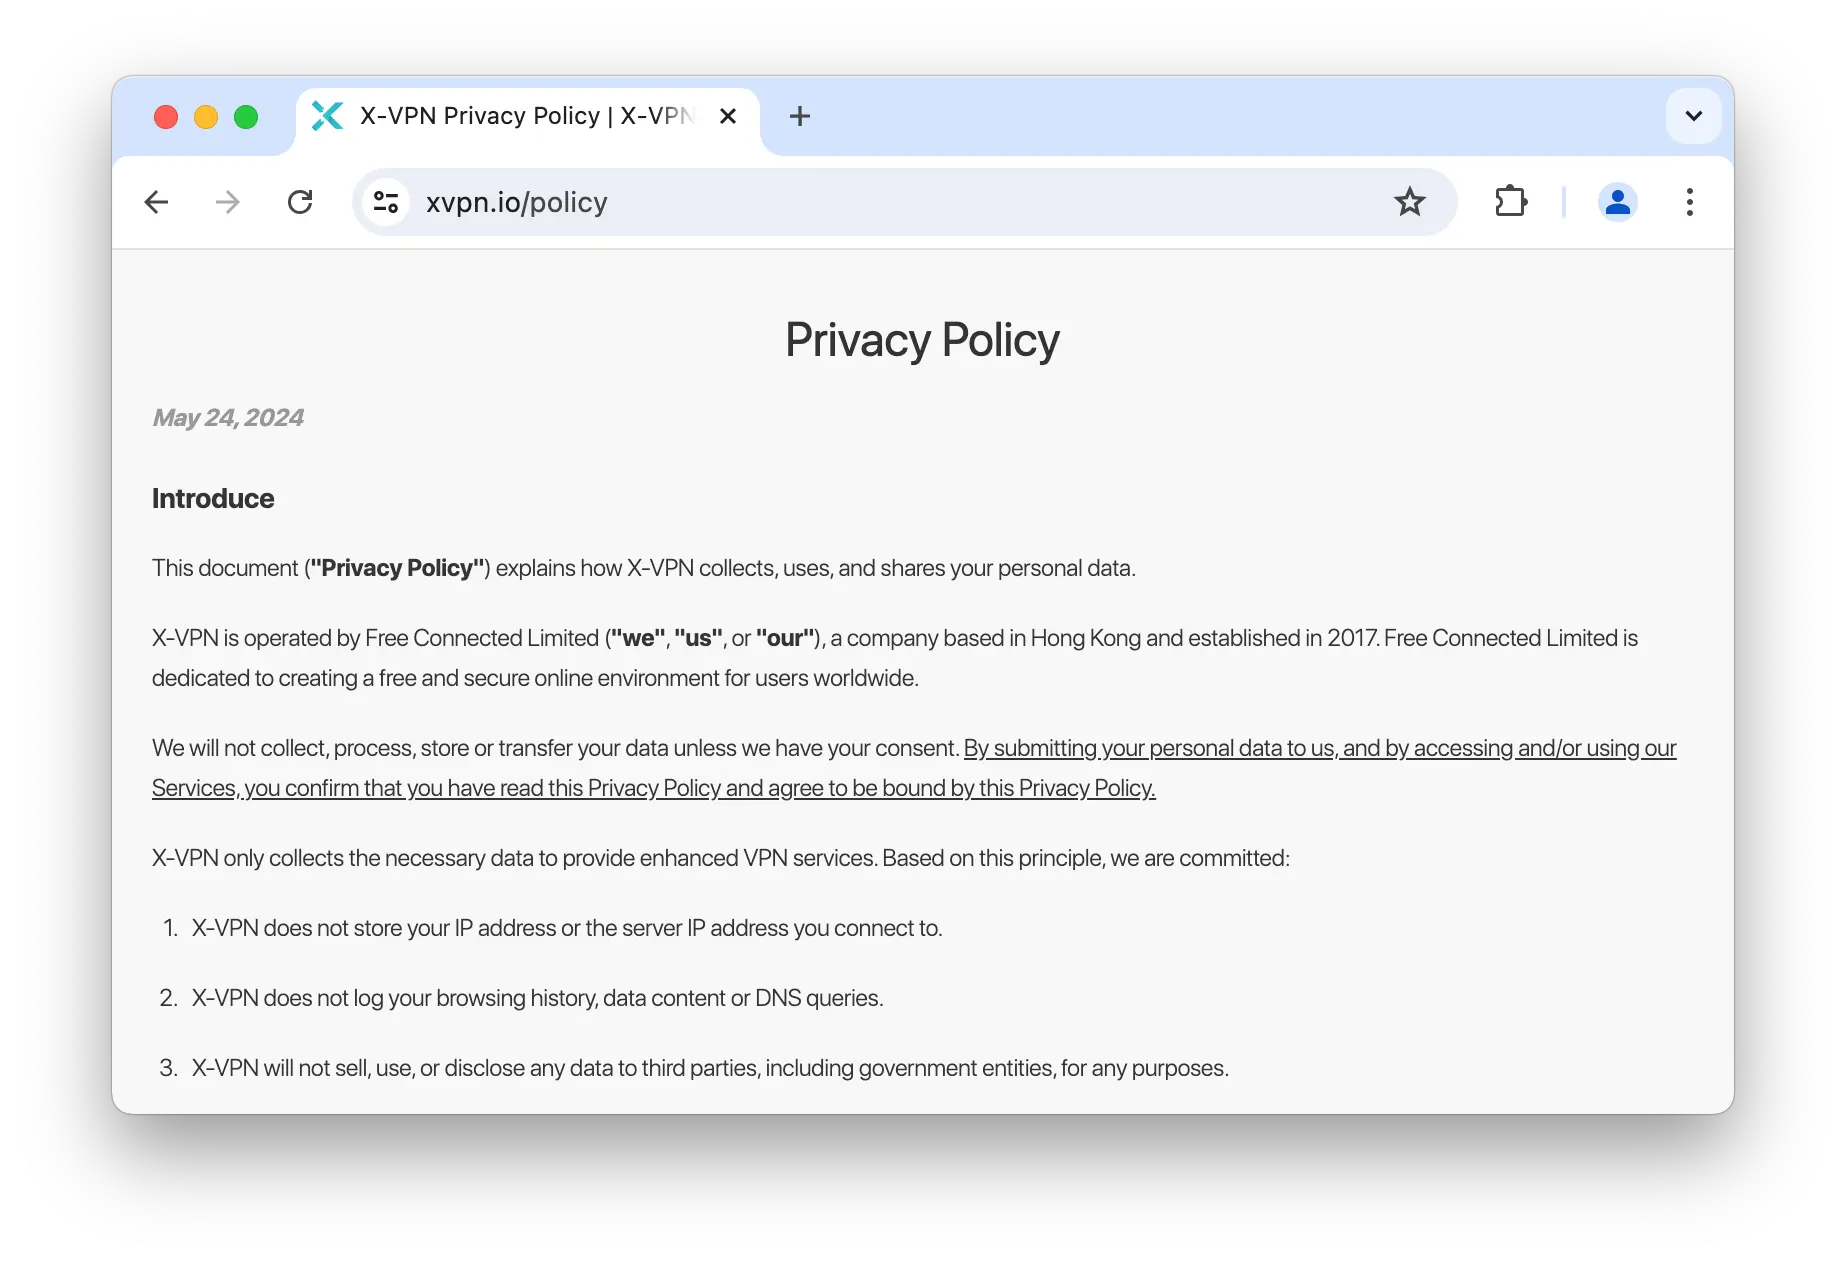 An extract from the beginning of X-VPN's privacy policy